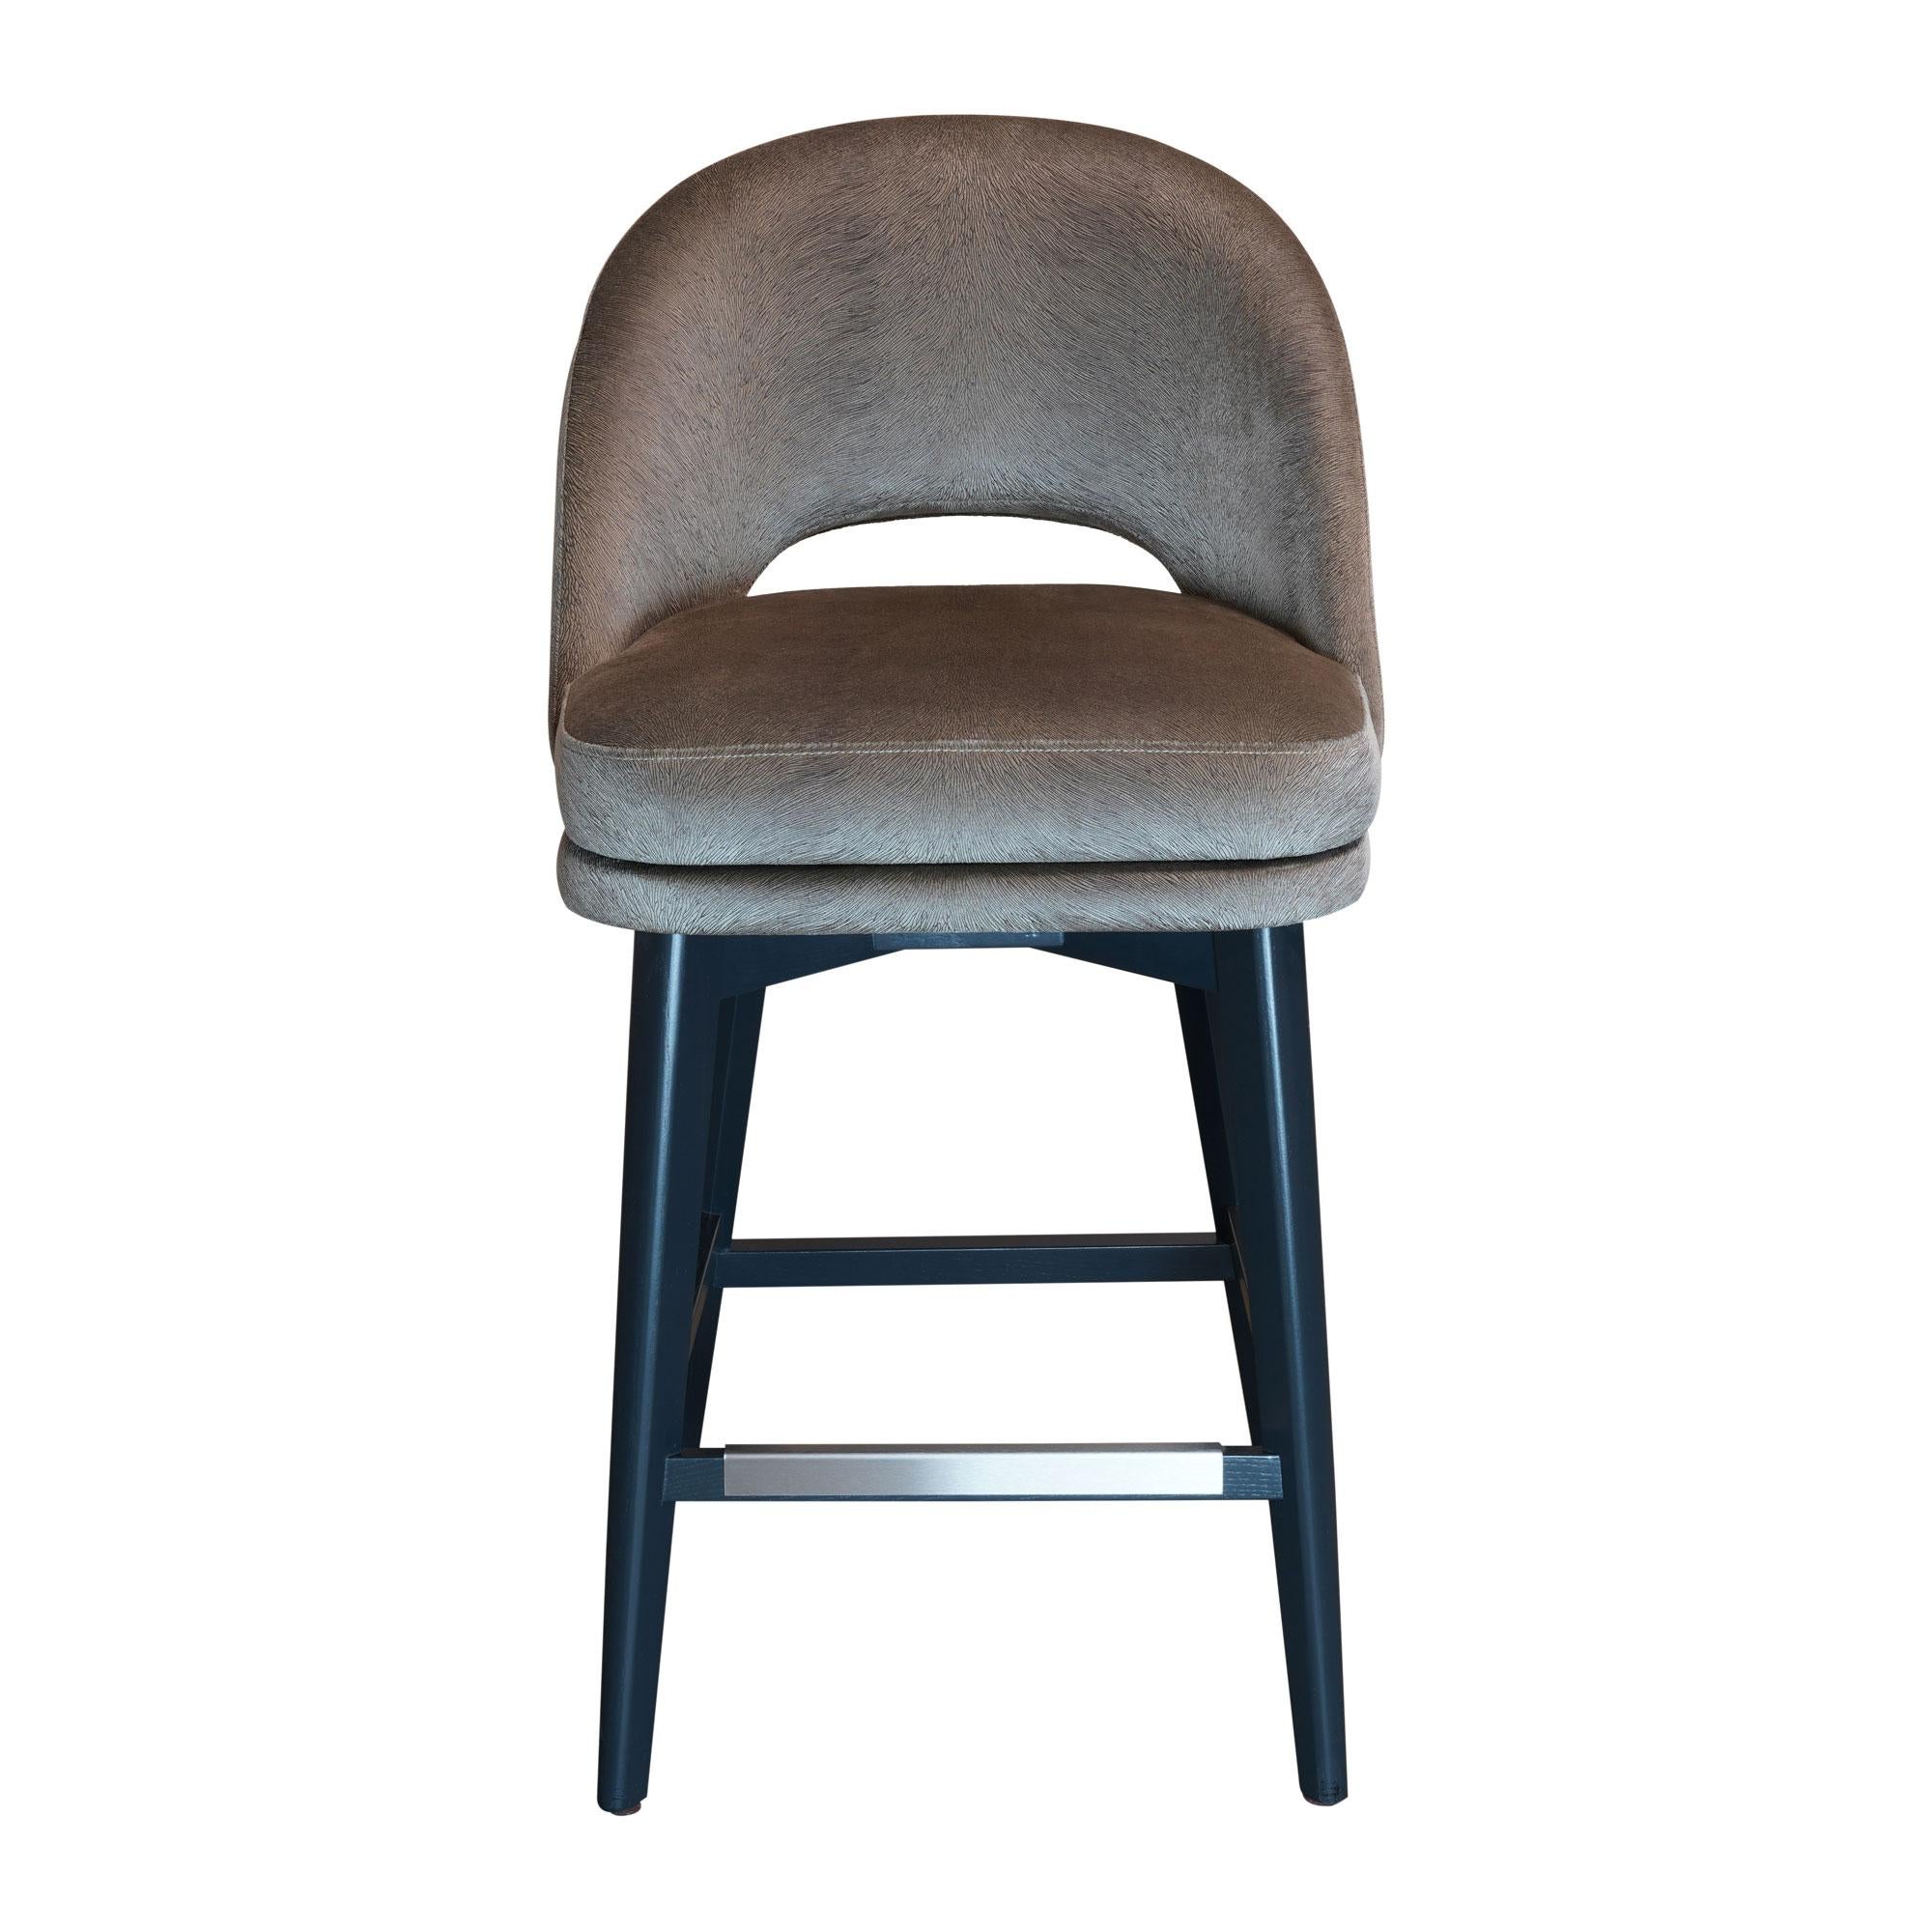 Counter stool with dark wenge stained beech legs, fully upholstered seat and back and brass footrest. COM.
Available in counter or bar height and totally customizable including finish, wood, metal and COM. Leather and fabric options available at an